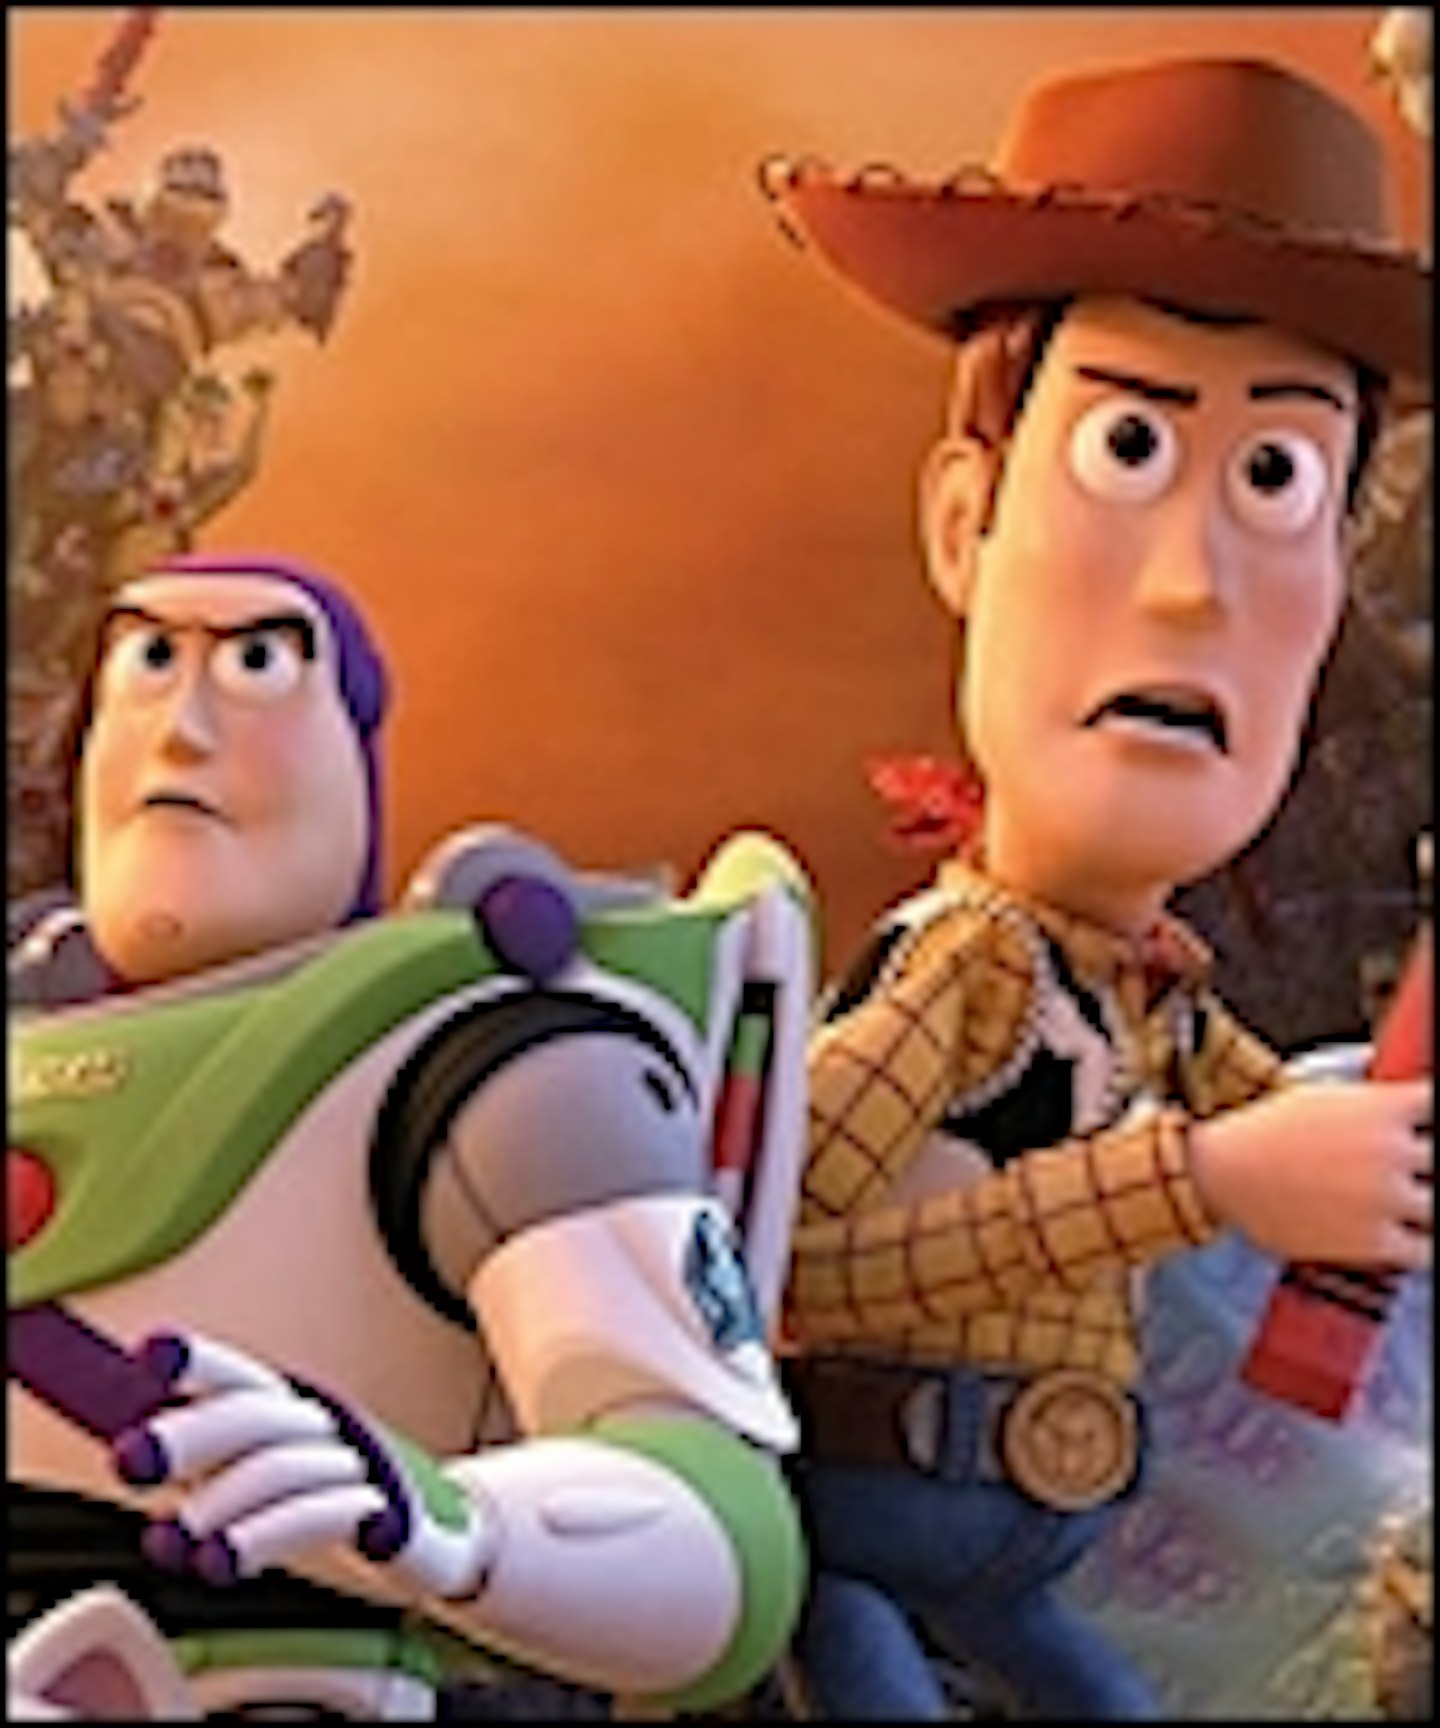 New Poster For Toy Story That Time Forgot